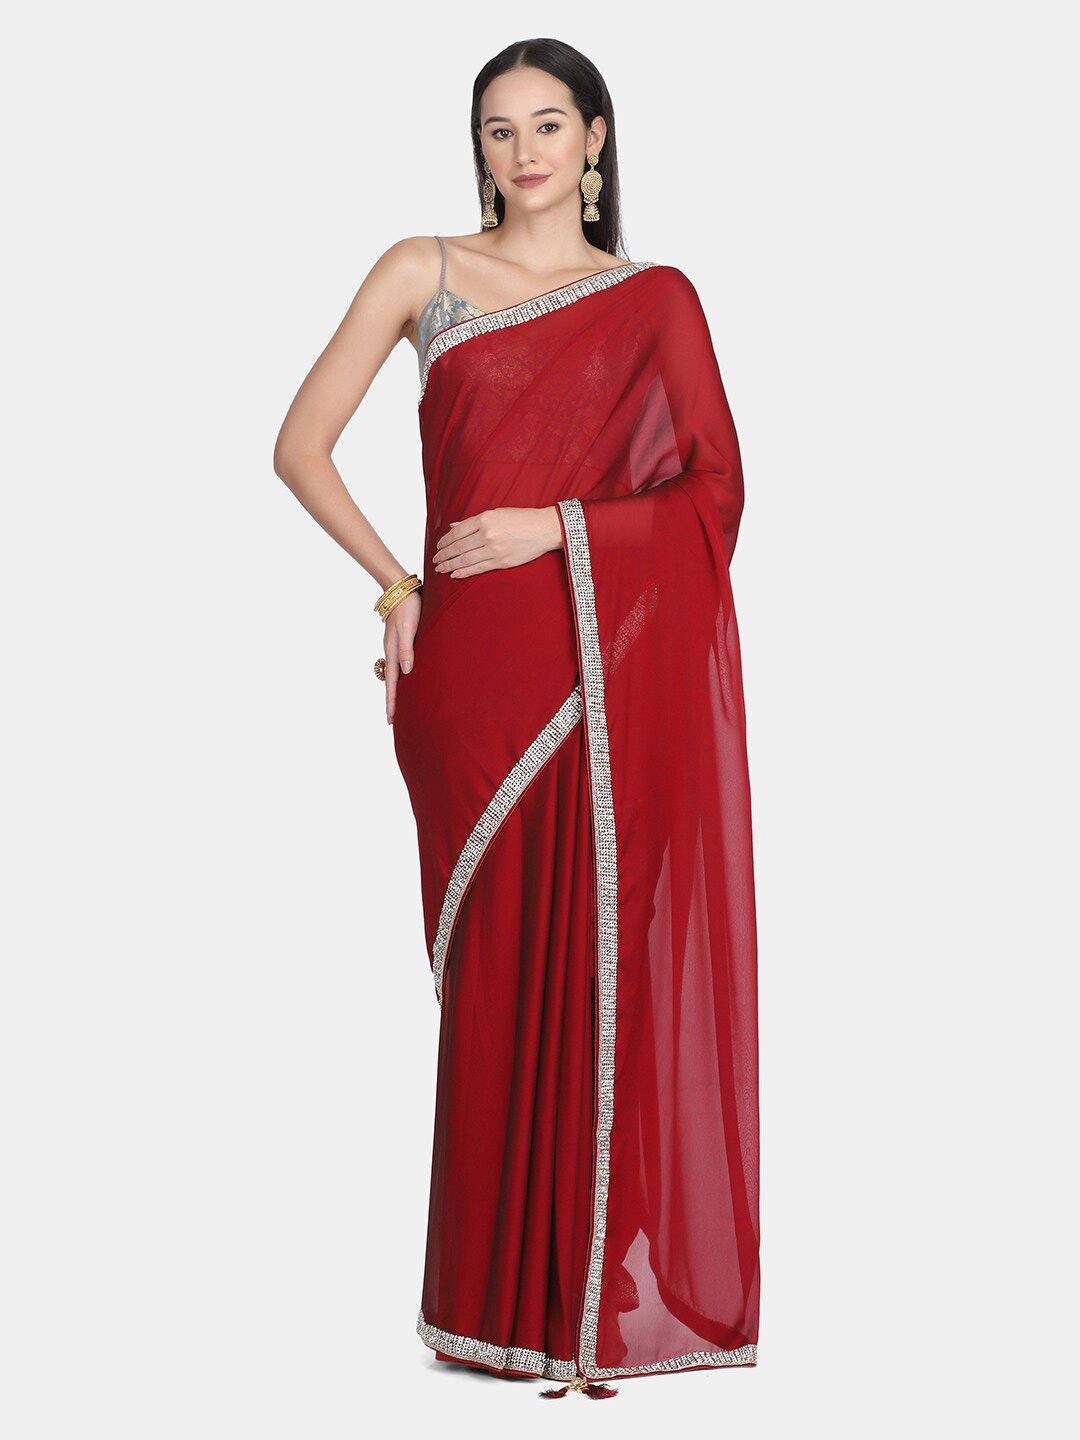 BOMBAY SELECTIONS Maroon & Silver-Toned Beads & Stones Embellished Pure Crepe Saree Price in India